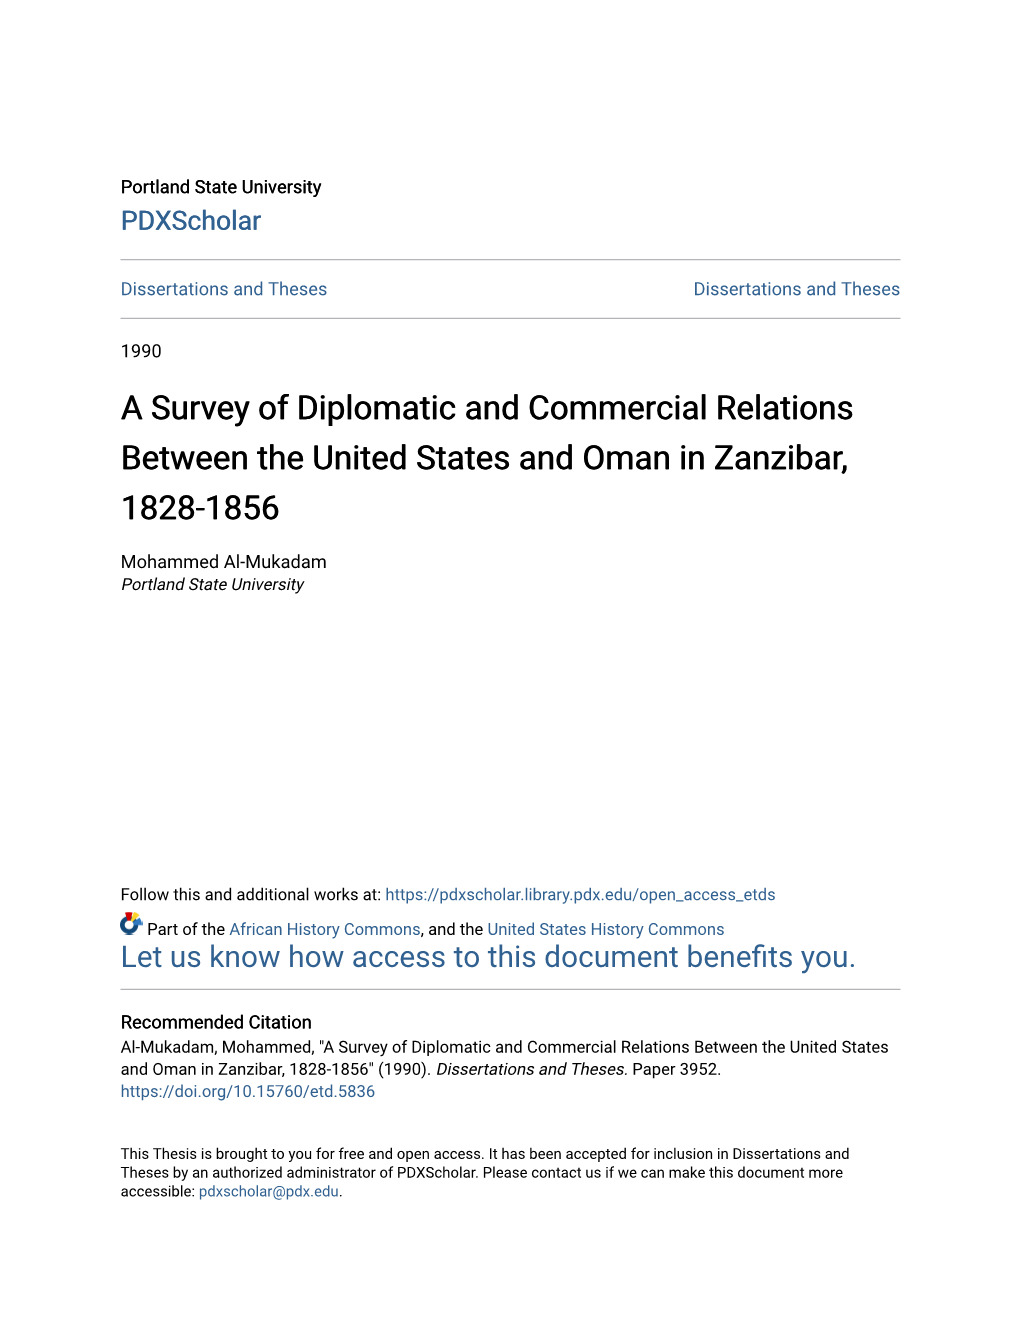 A Survey of Diplomatic and Commercial Relations Between the United States and Oman in Zanzibar, 1828-1856